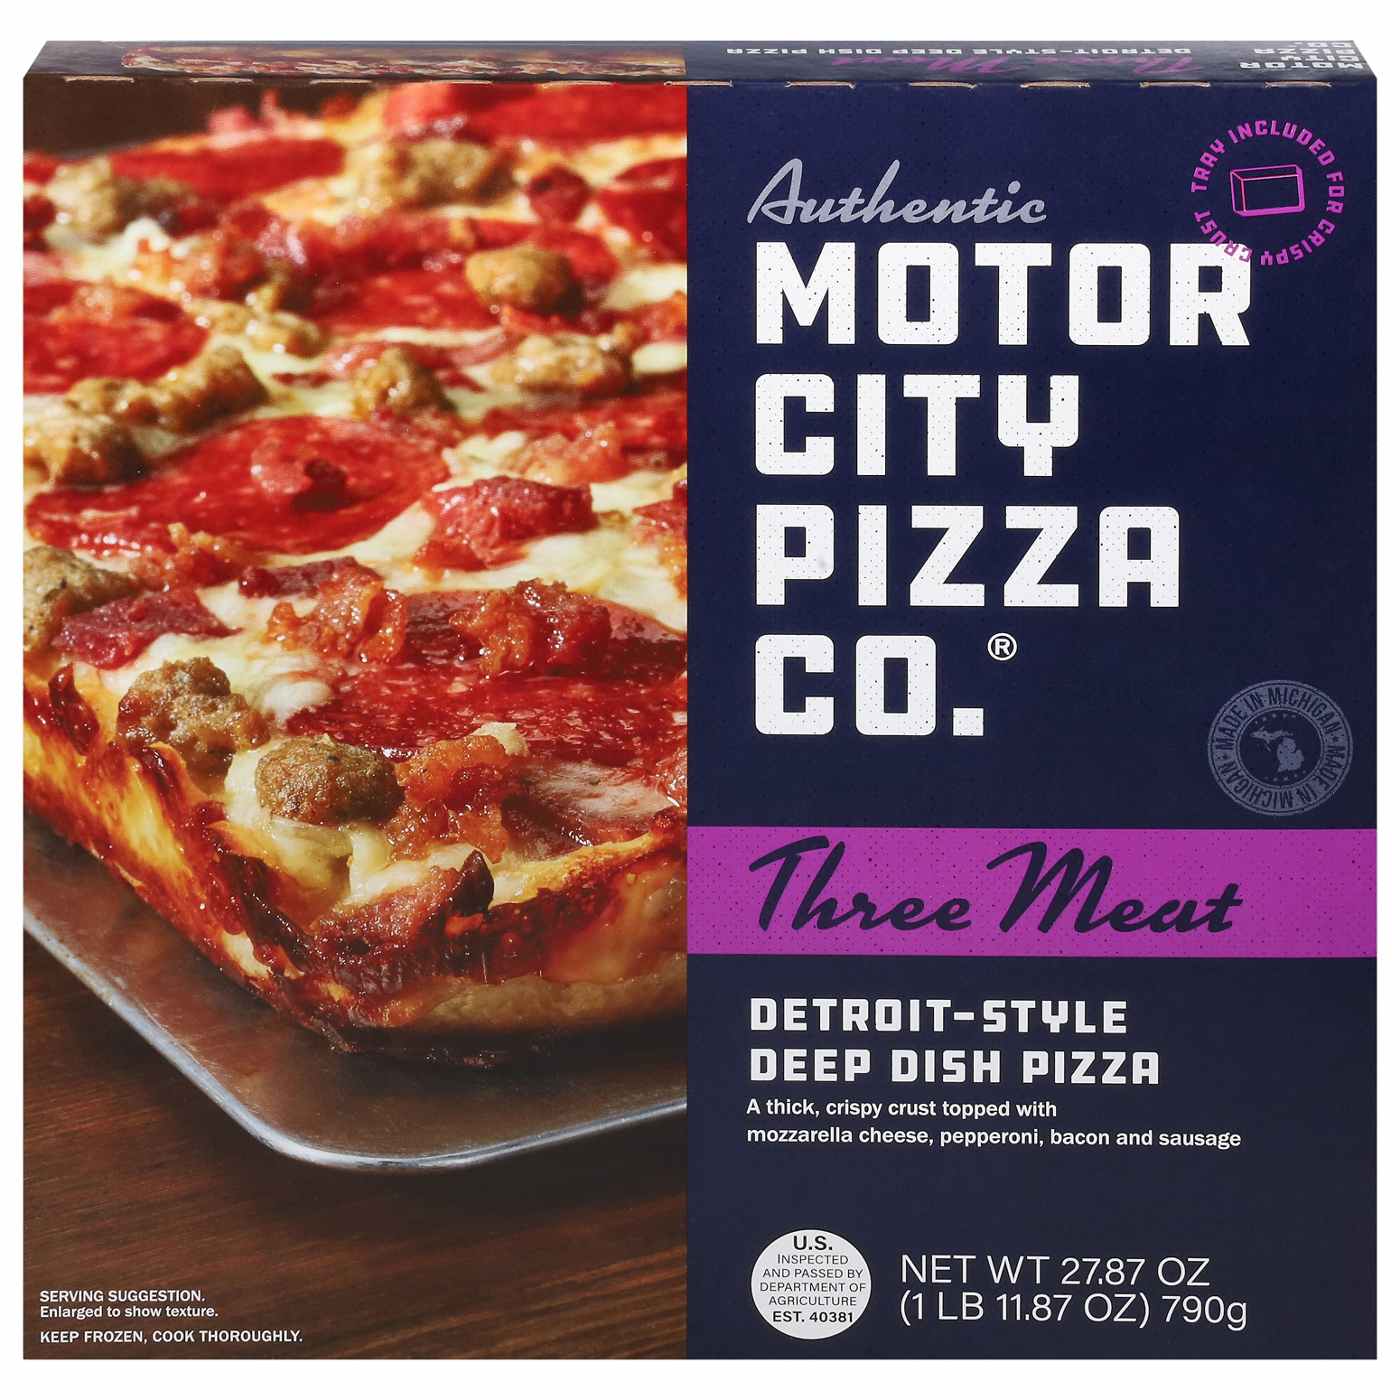 Authentic Motor City Pizza Co. Detroit-Style Deep Dish Frozen Pizza - Three Meat; image 1 of 2